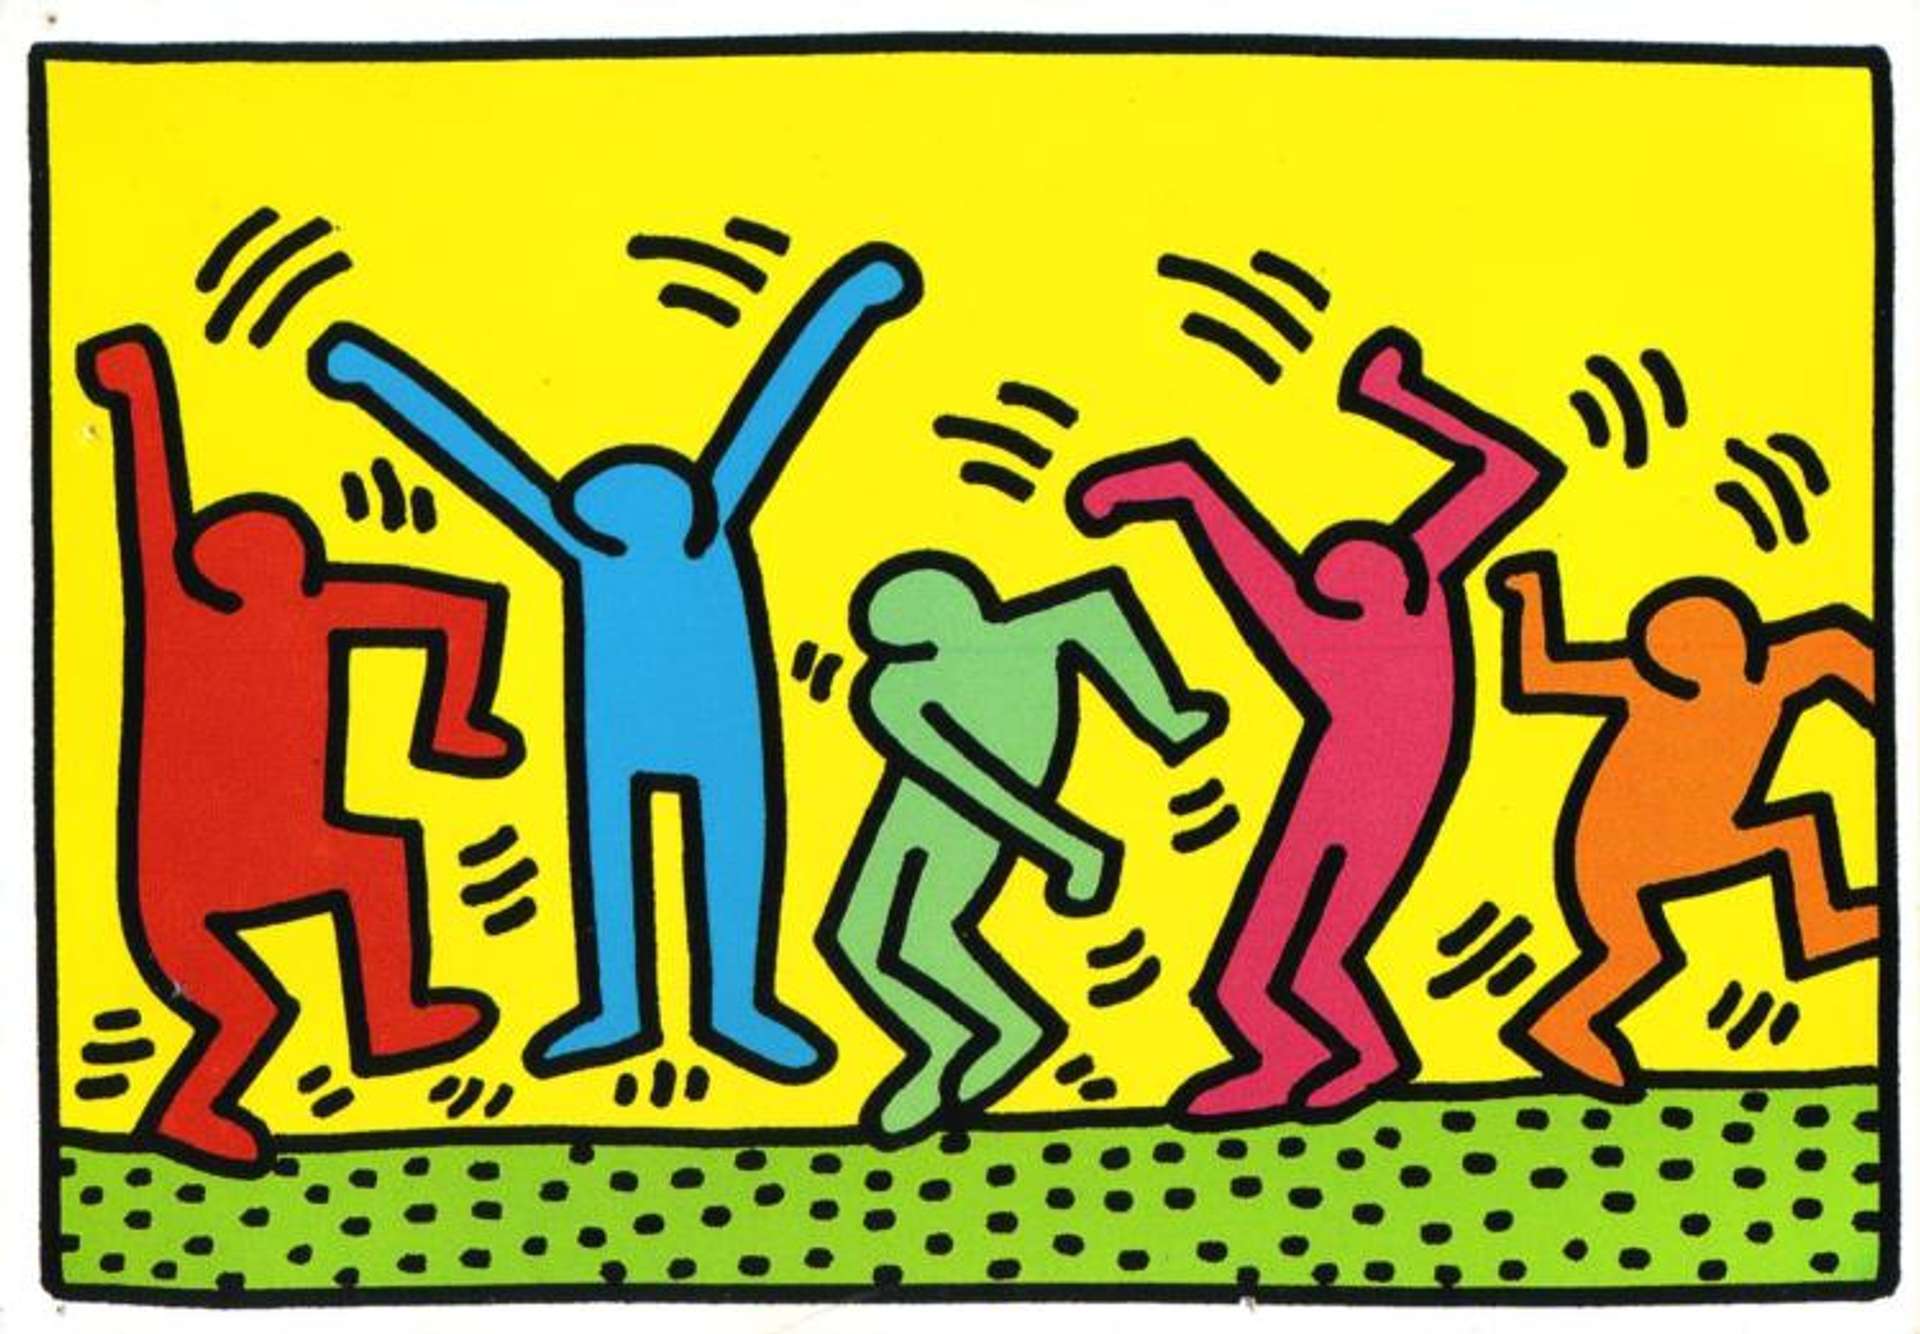 Keith Haring’s Untitled (Dance). A Pop Art style painting with 5 dancing figures. One red, blue, green, pink, and orange. They’re moving in front of a yellow background and green floor with black polka dots.